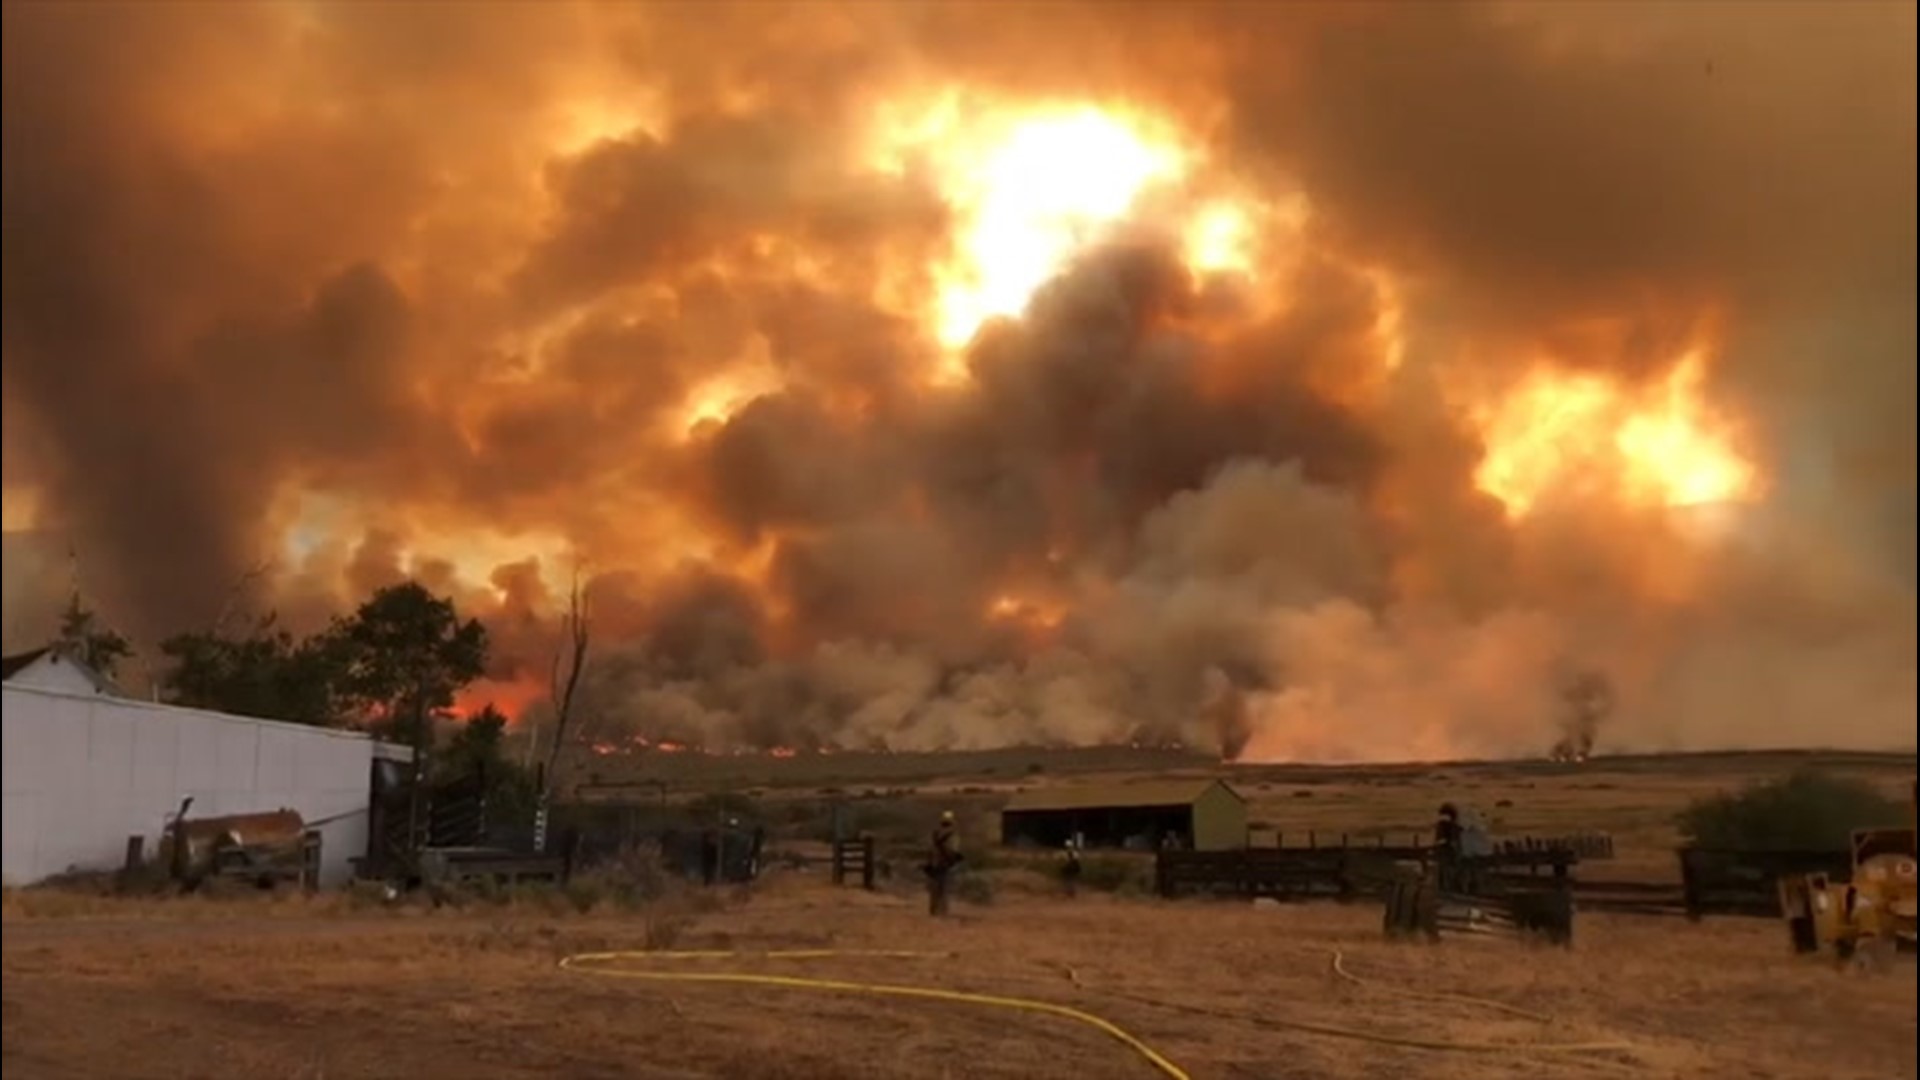 The Slink Fire in California spawned fire whirls while threatening the town of Coleville on Aug. 31 and Sept. 1. Lightning is believed to have started the fire.